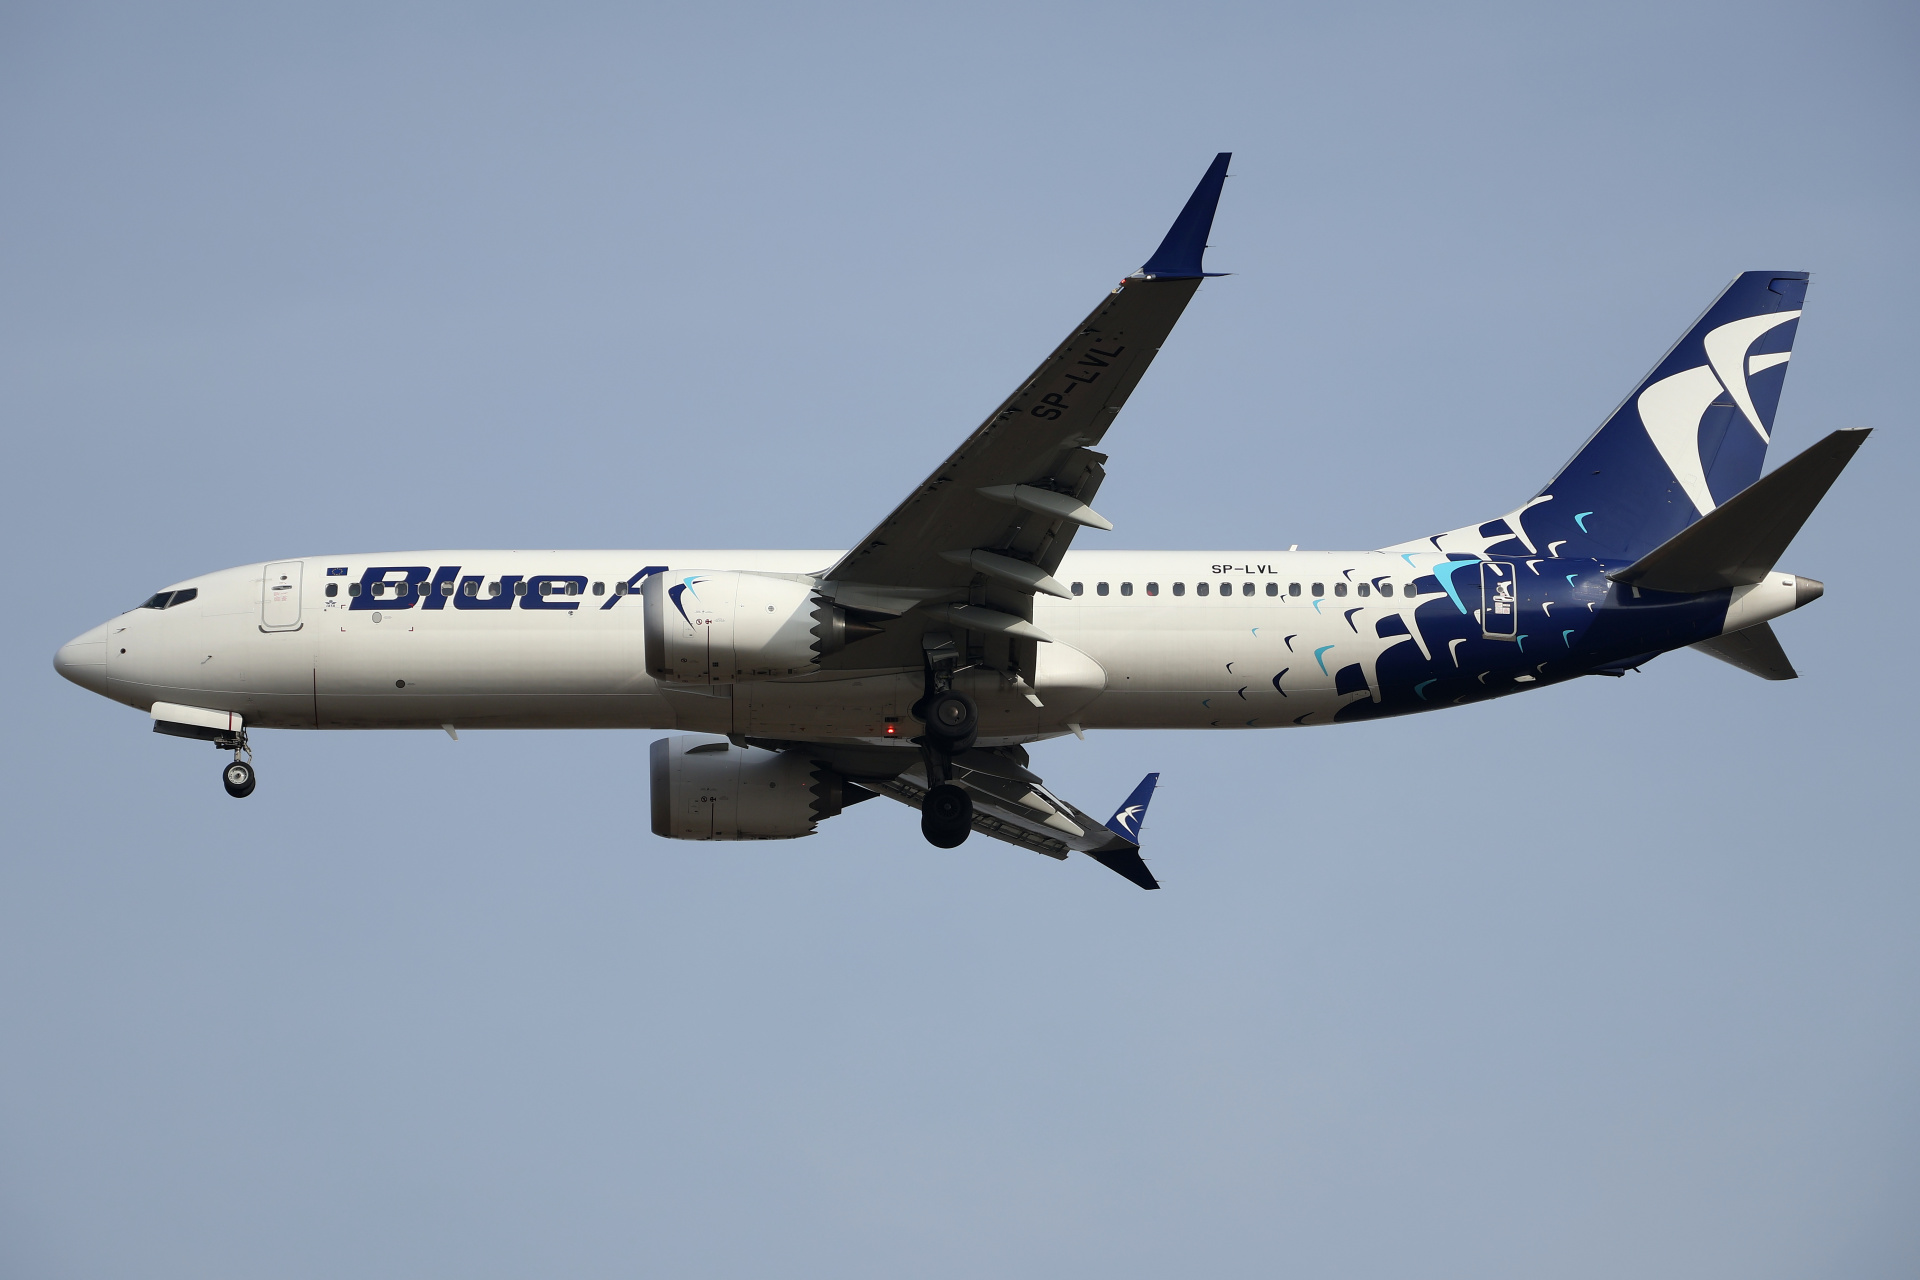 SP-LVL (Blue Air) (Aircraft » EPWA Spotting » Boeing 737-8 MAX » LOT Polish Airlines)